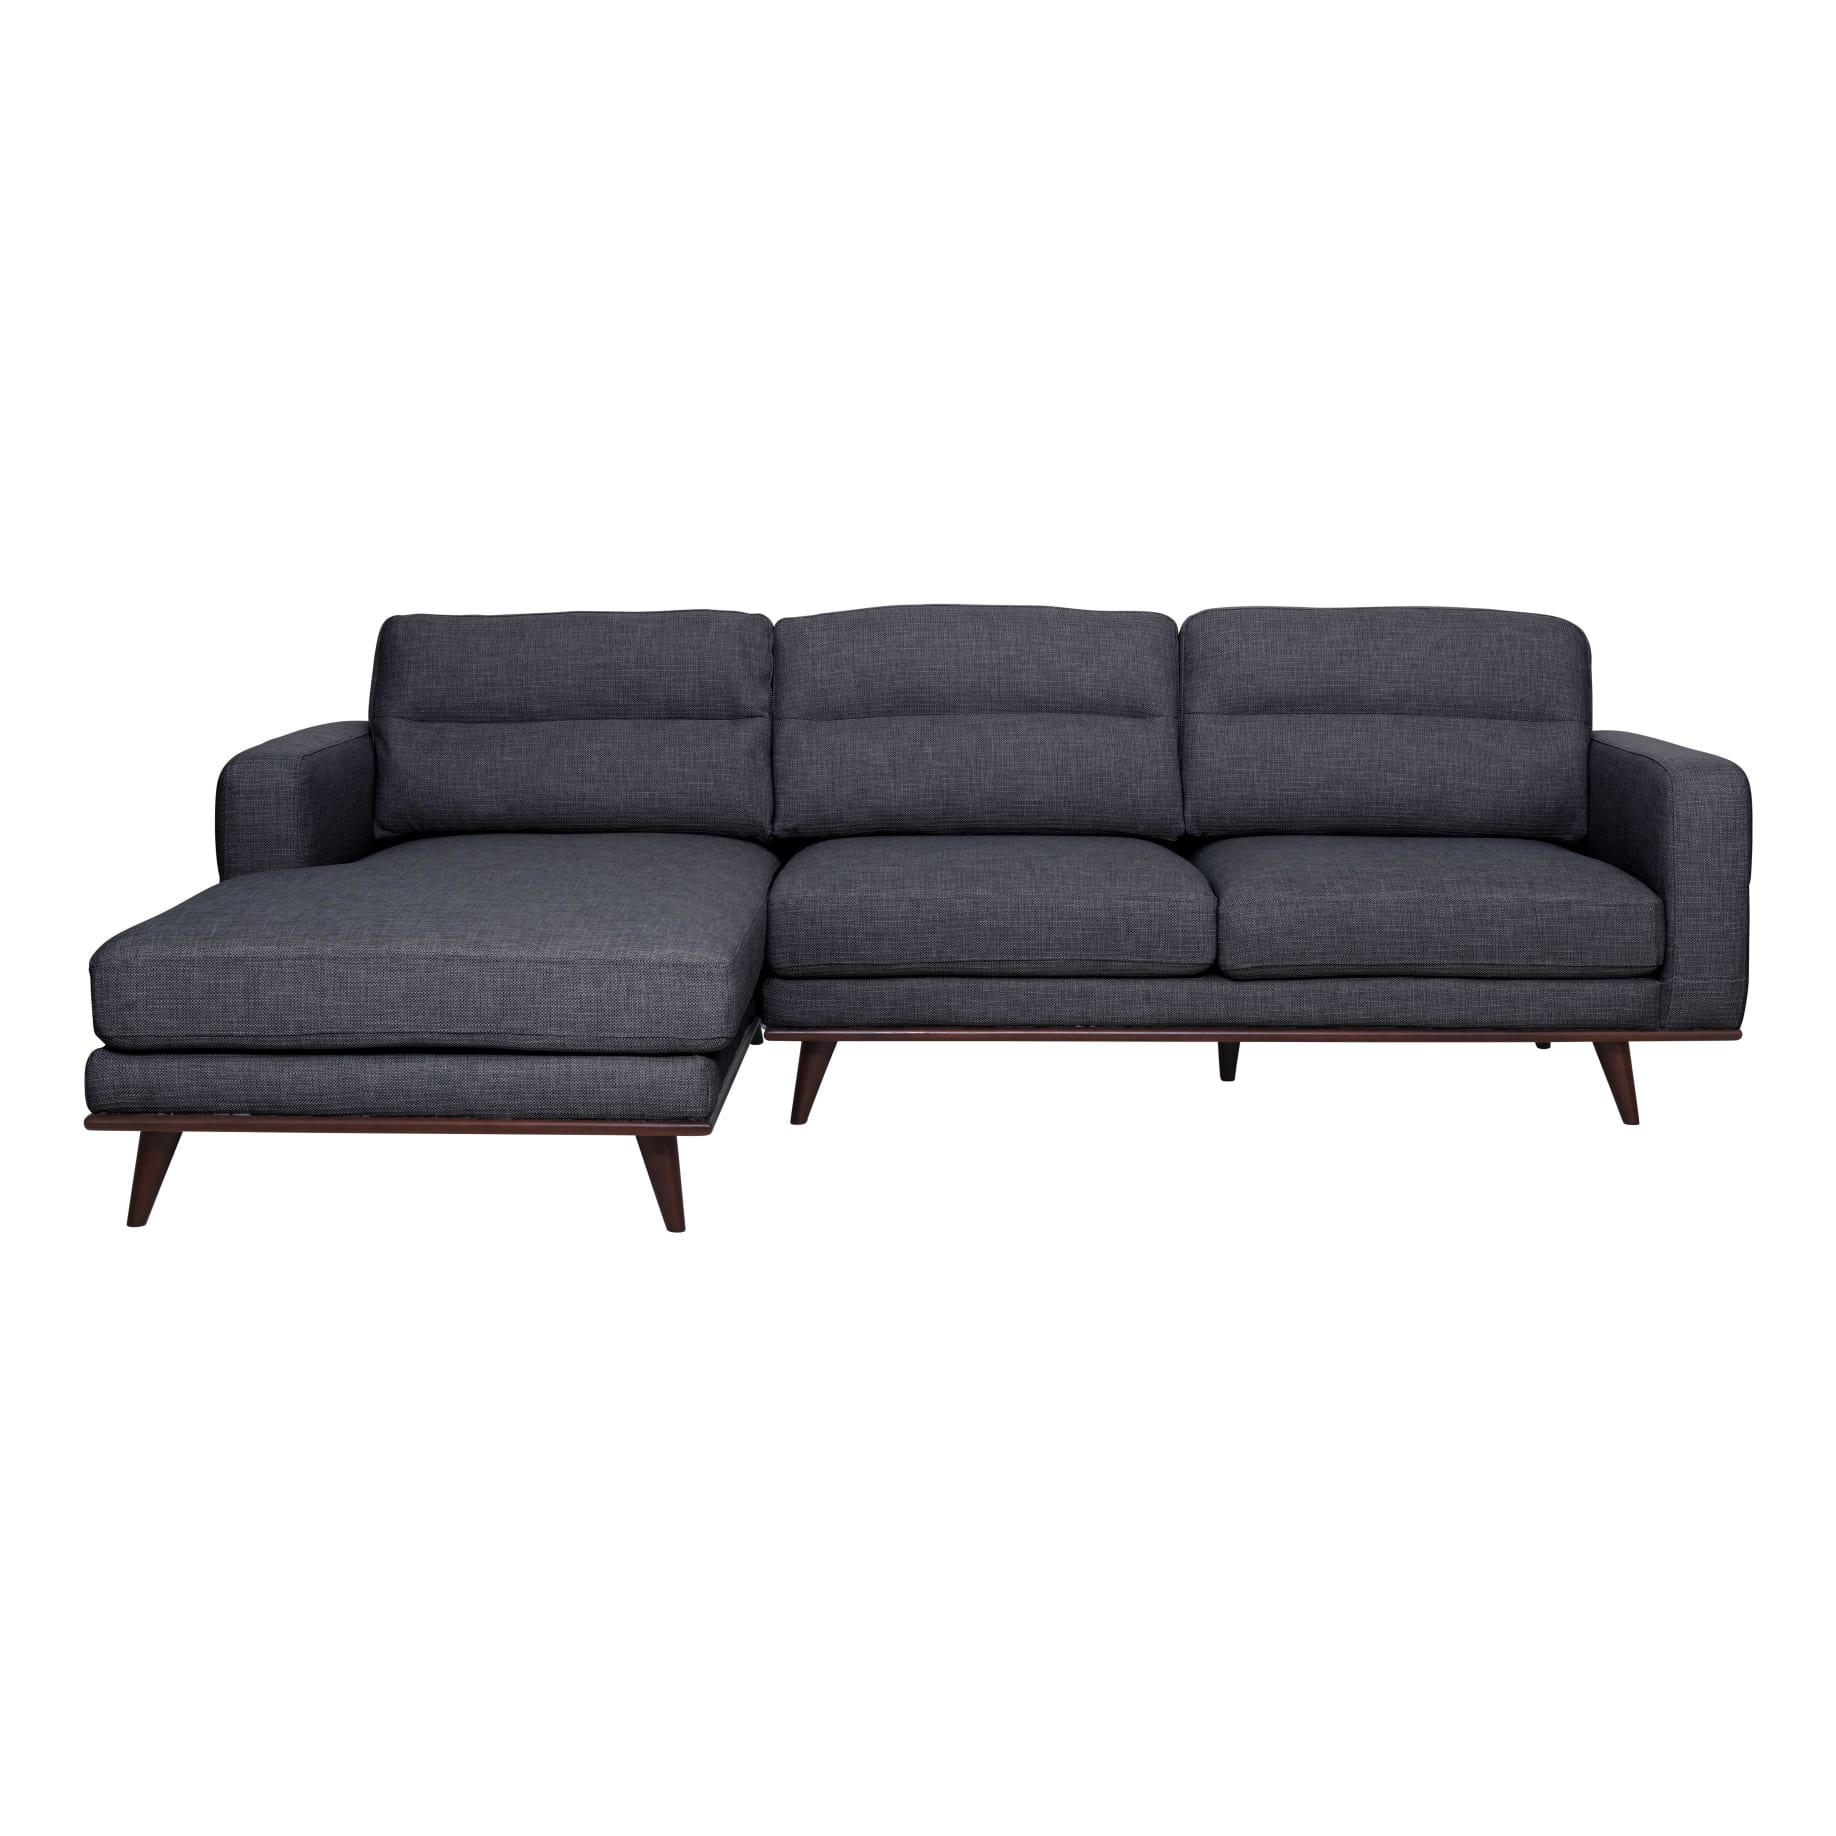 Astrid 2.5 + Chaise LHF in Talent Charcoal